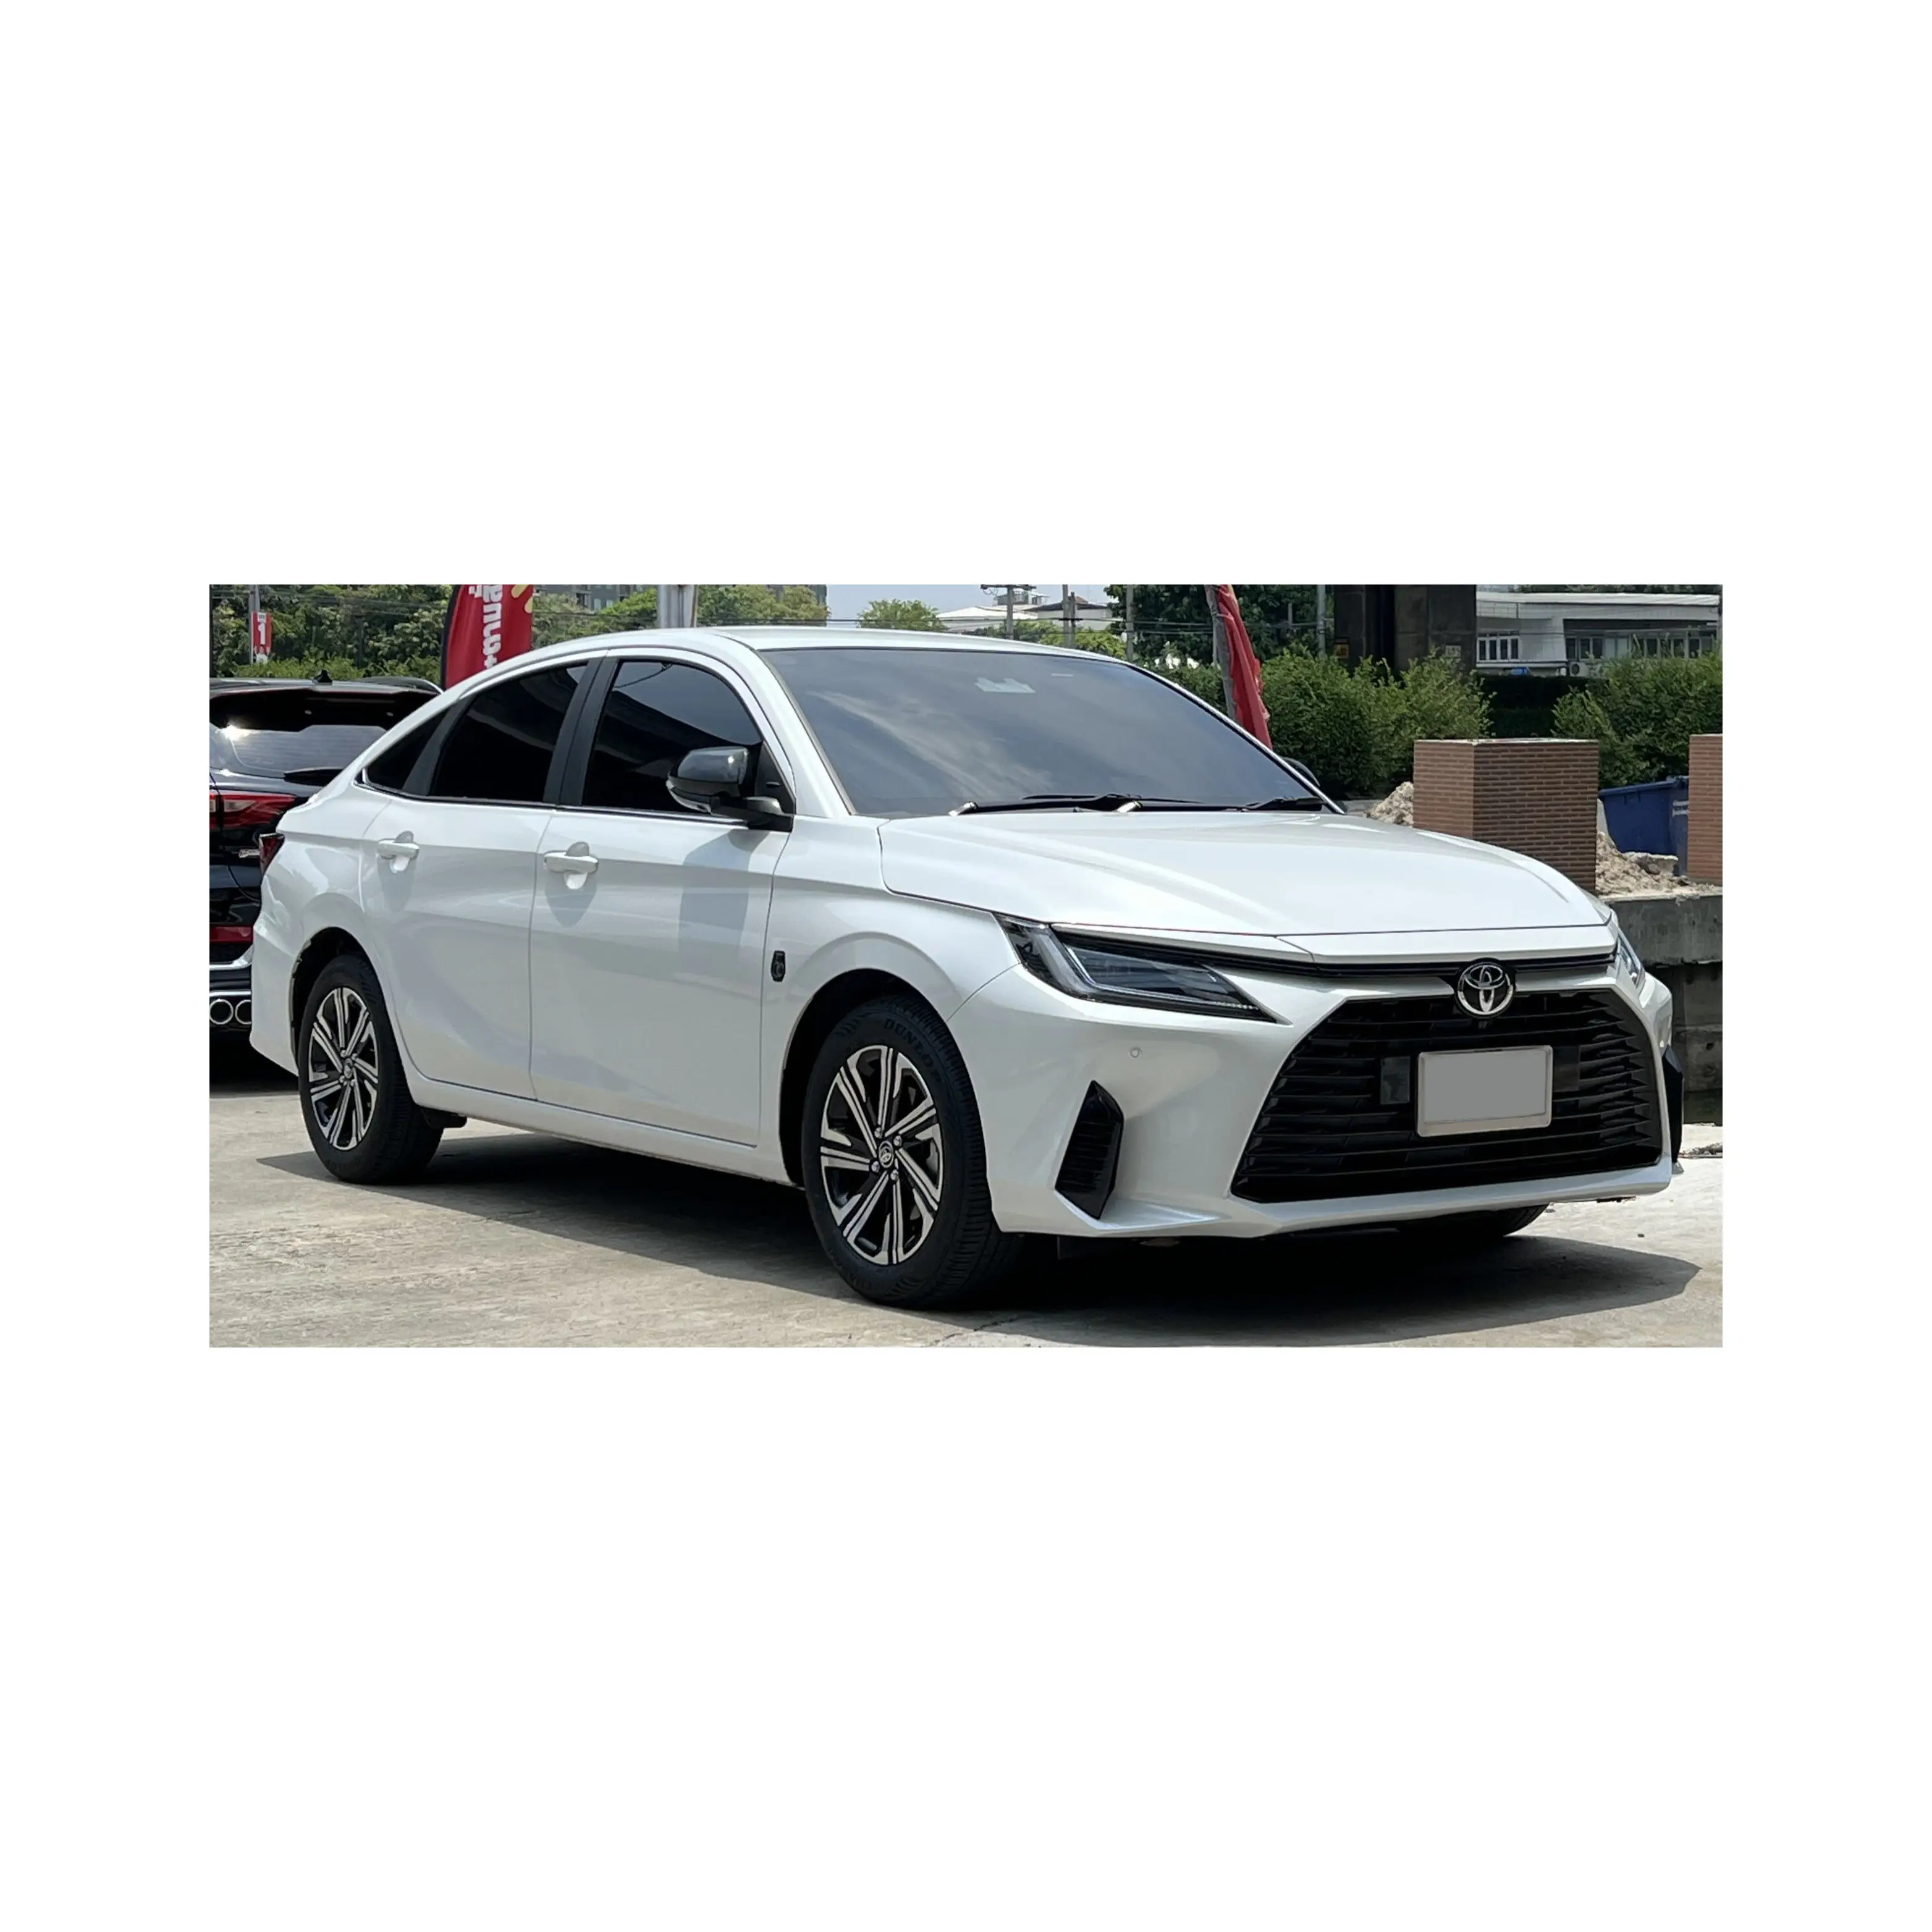 Fast Delivery Worldwide Used Toyota Limo 2018-2019 for sale